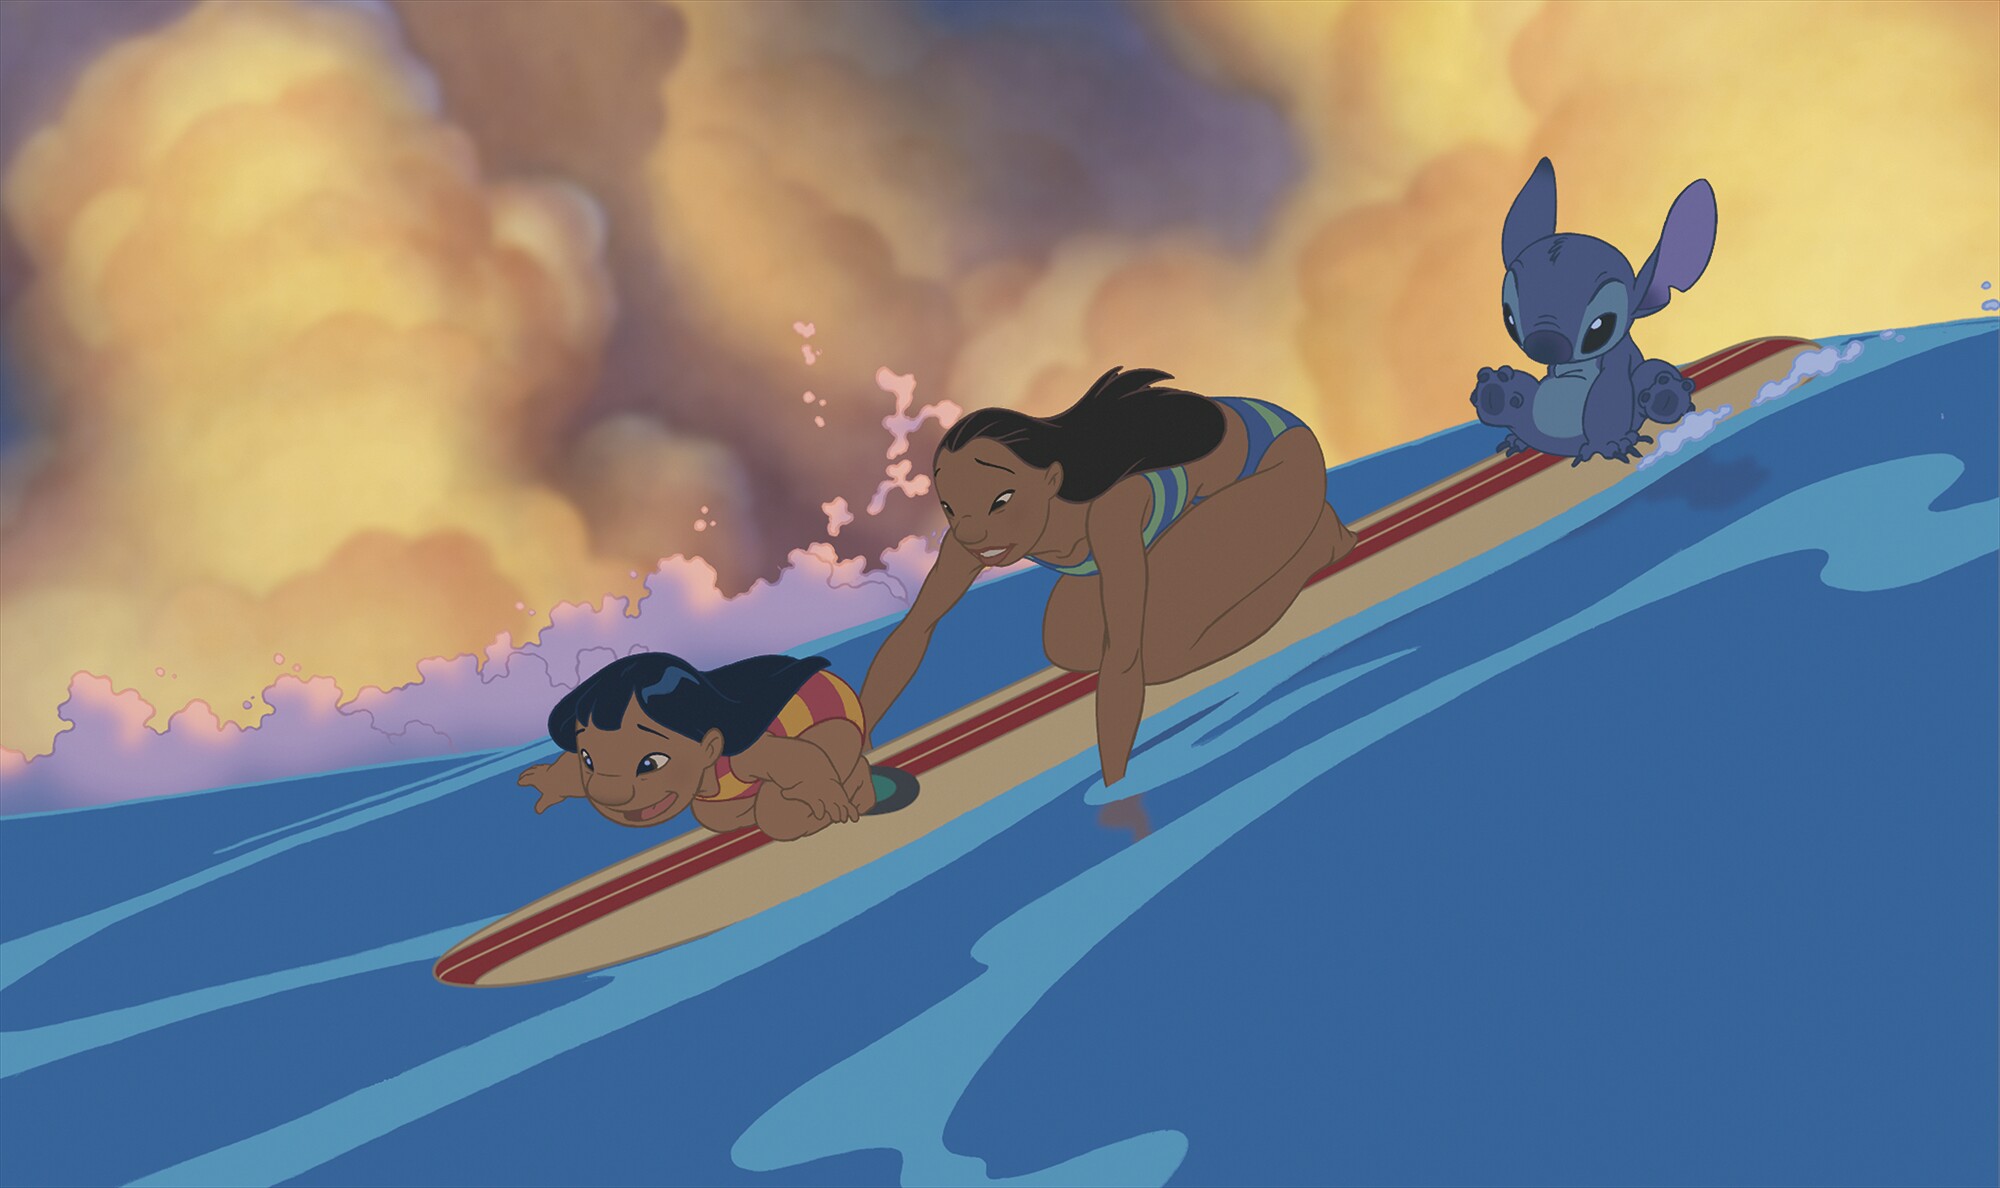 A cartoon image of a girl, a woman and a furry blue creature riding a wave on a surfboard